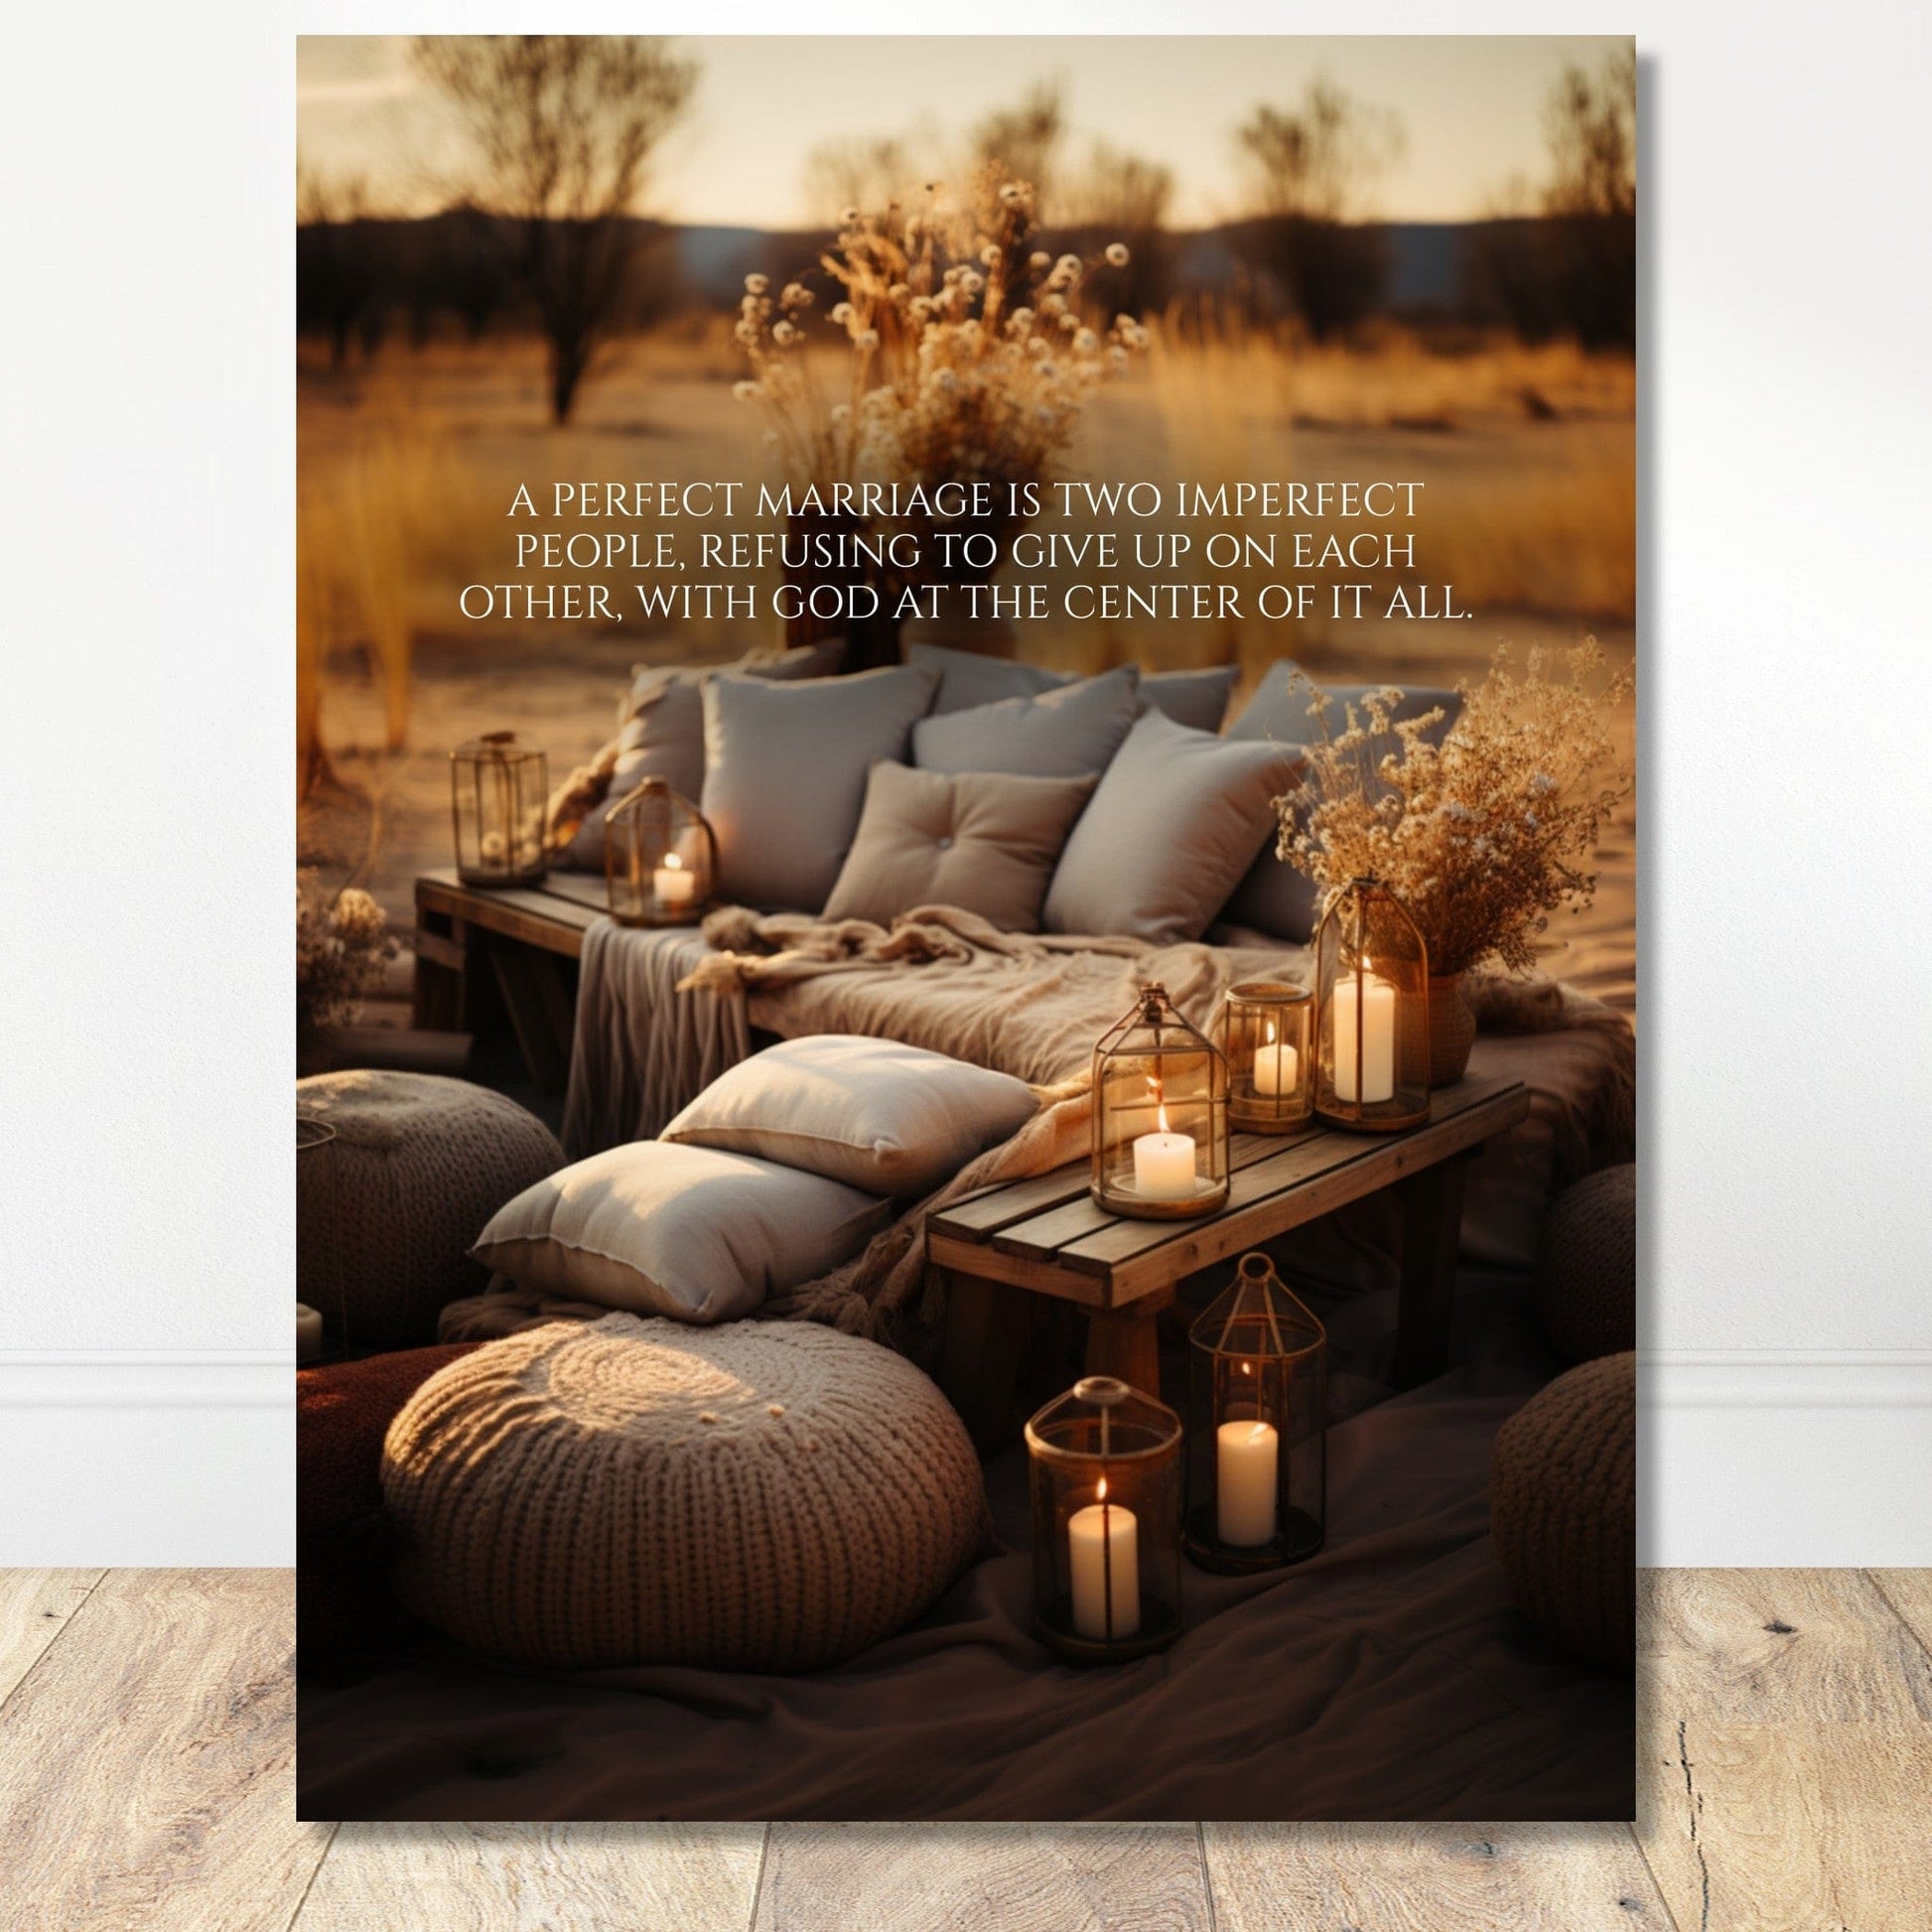 Coffee With My Father Print Material 45x60 cm / 18x24″ / Unframed / Unframed - Poster Only God-Centered Marriage - Custom Art